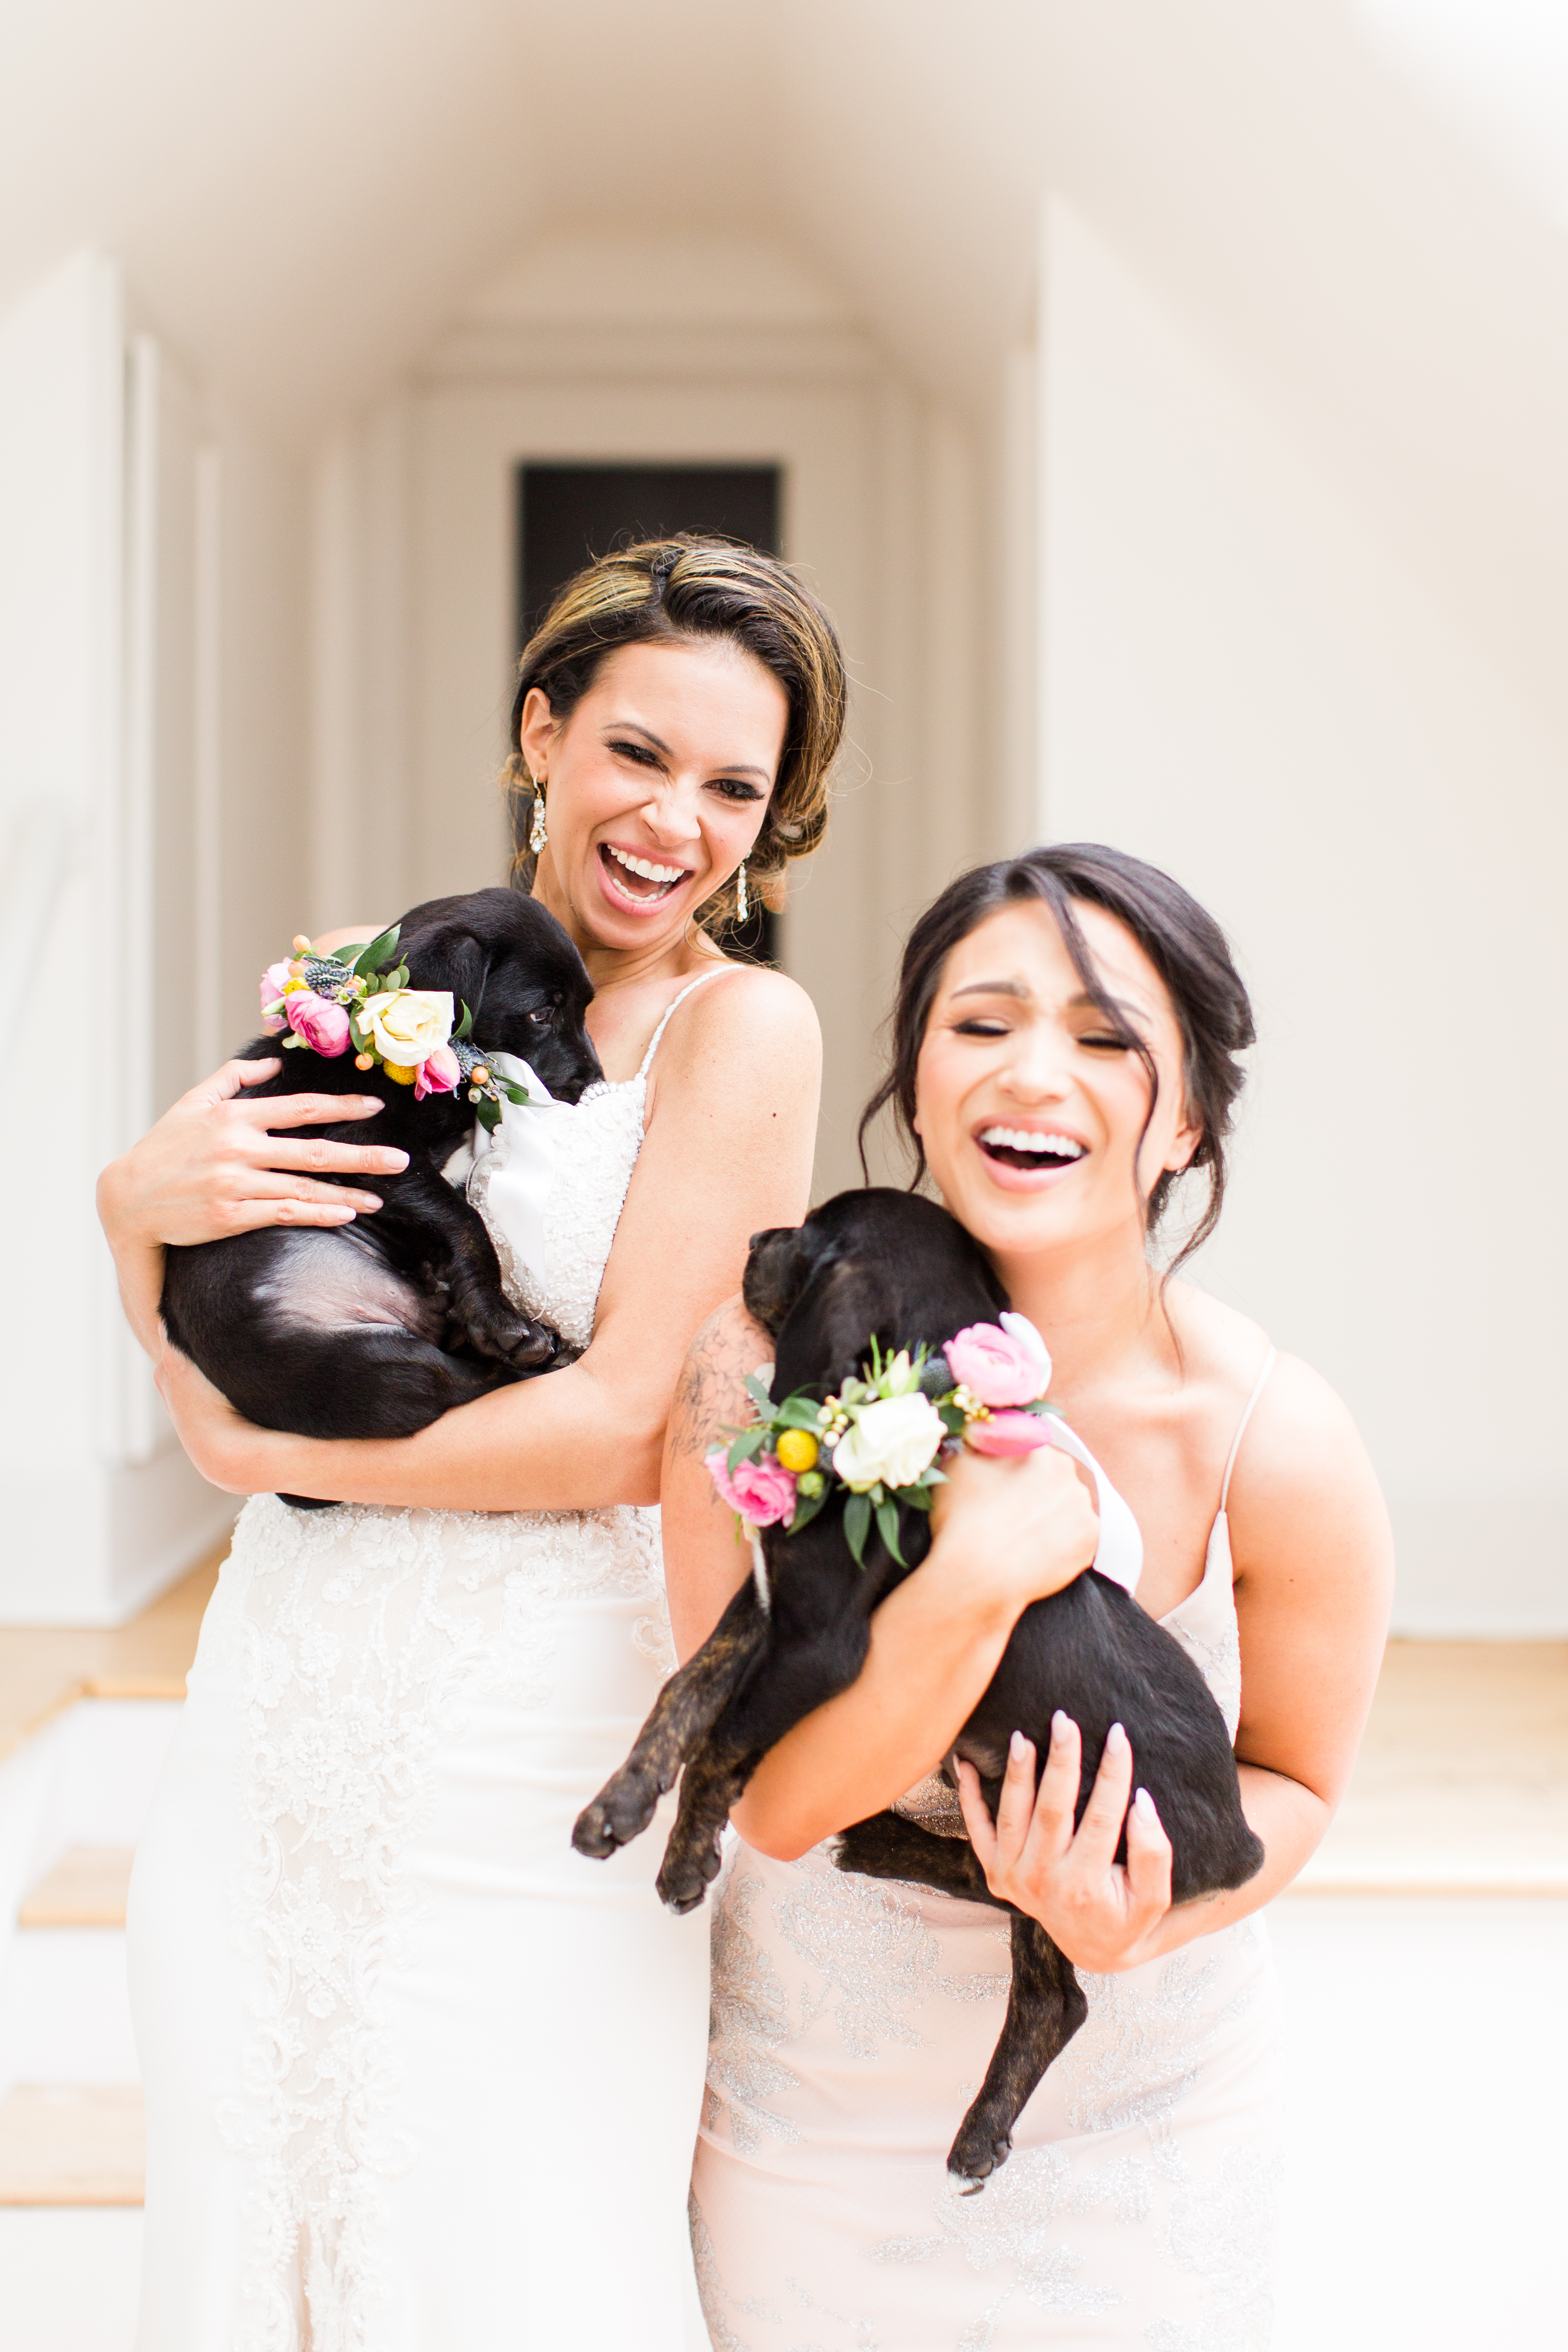 Puppy Love Photo Shoot at House of White Bridal with dogs from Warrick Humane Society and floral necklaces by Emerald Design